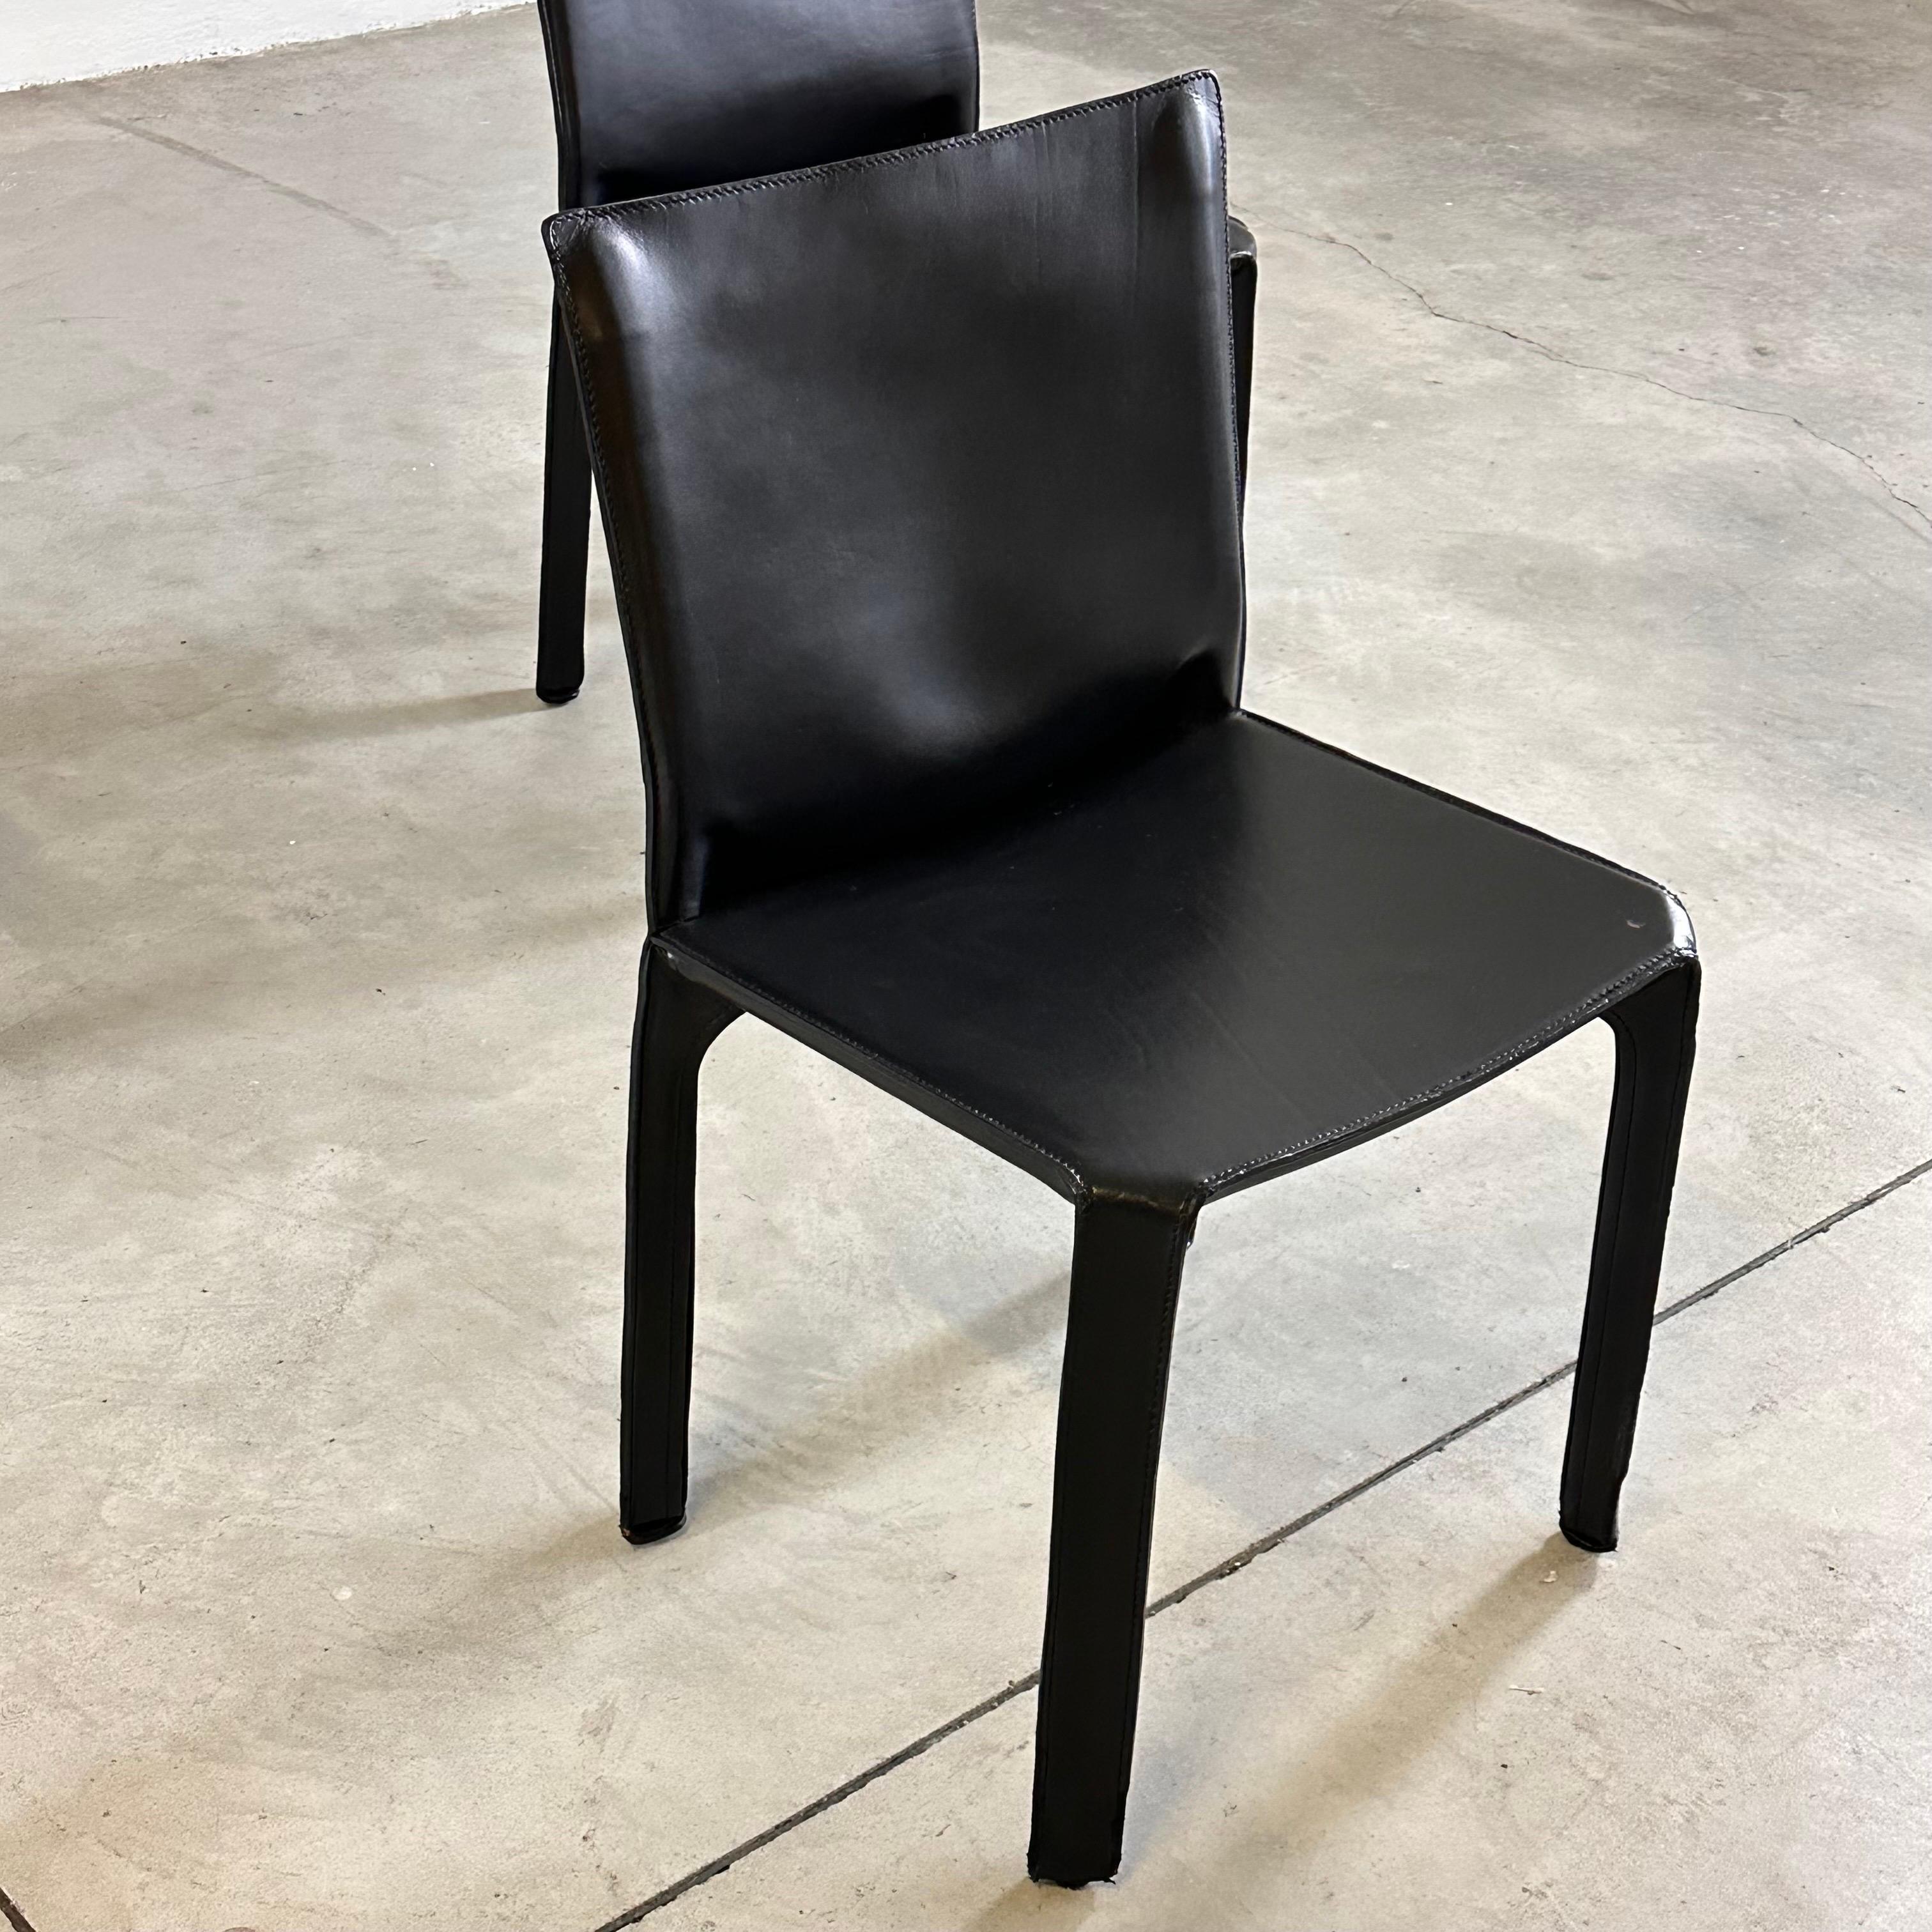 Set of Four CAB 412 Chairs by Mario Bellini for Cassina in Black Leather, 1970s For Sale 1